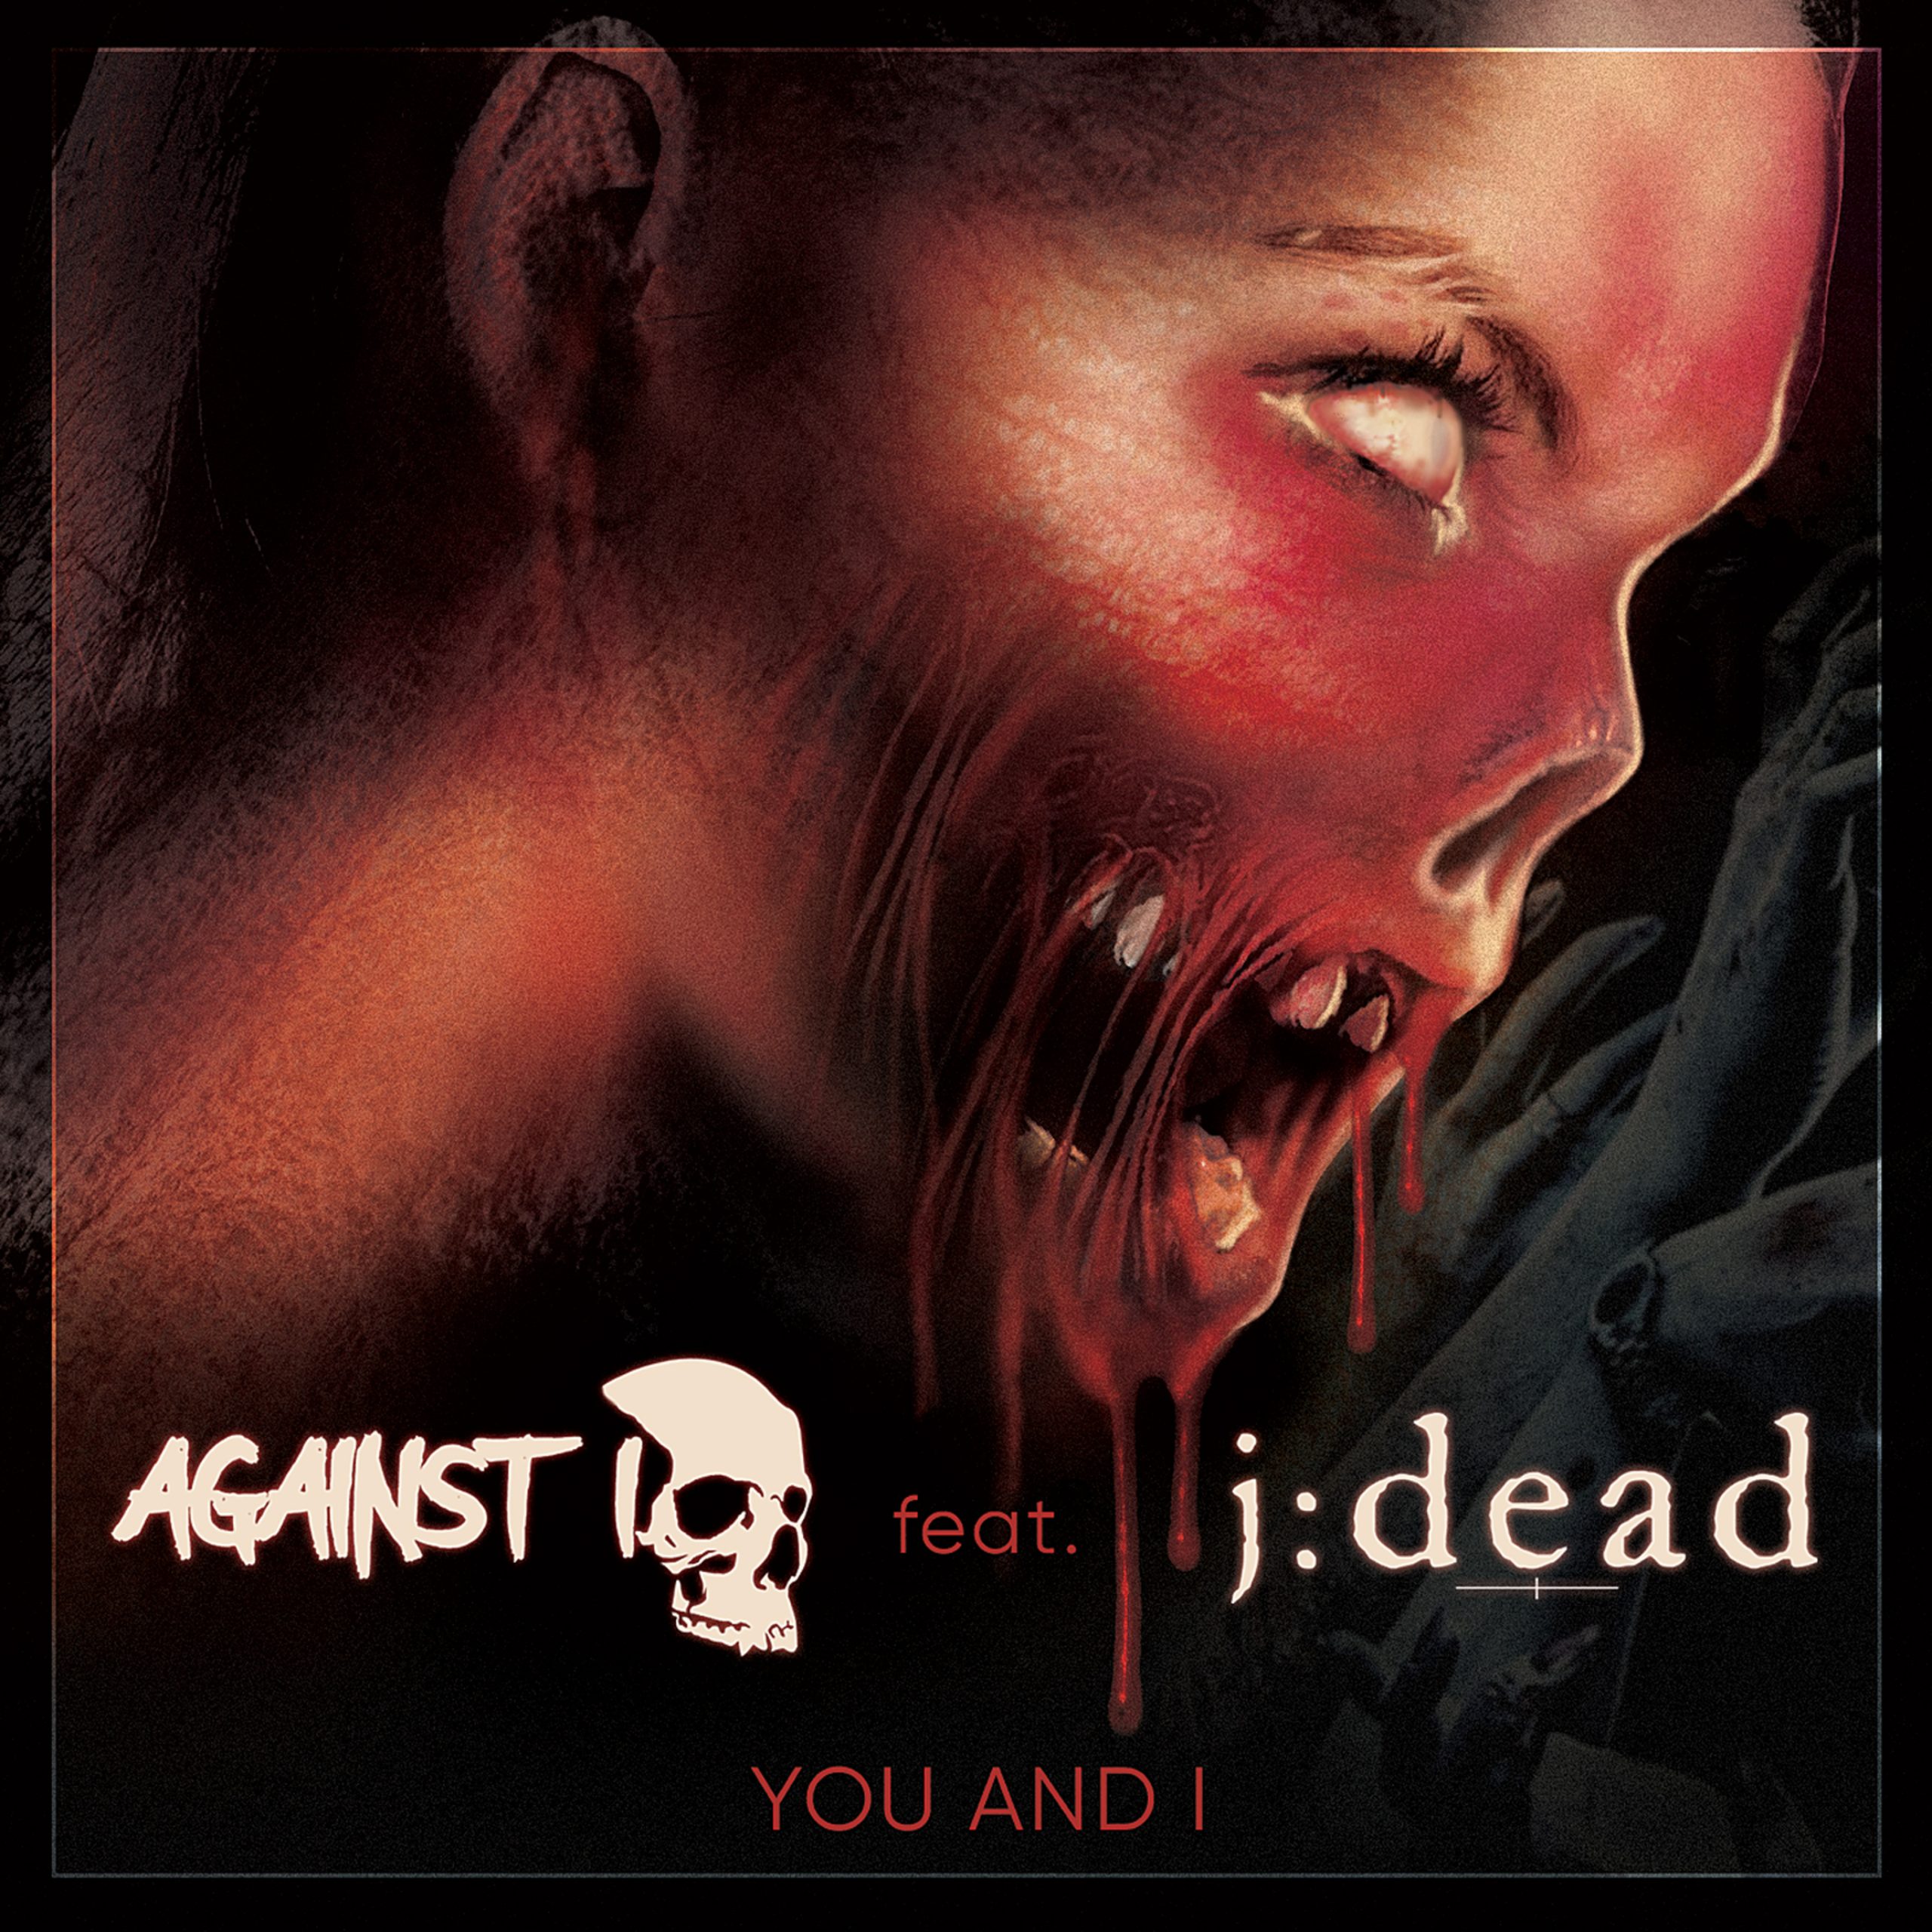 Against I Addresses Broken Relationships With “You And I” // EBM Industrial